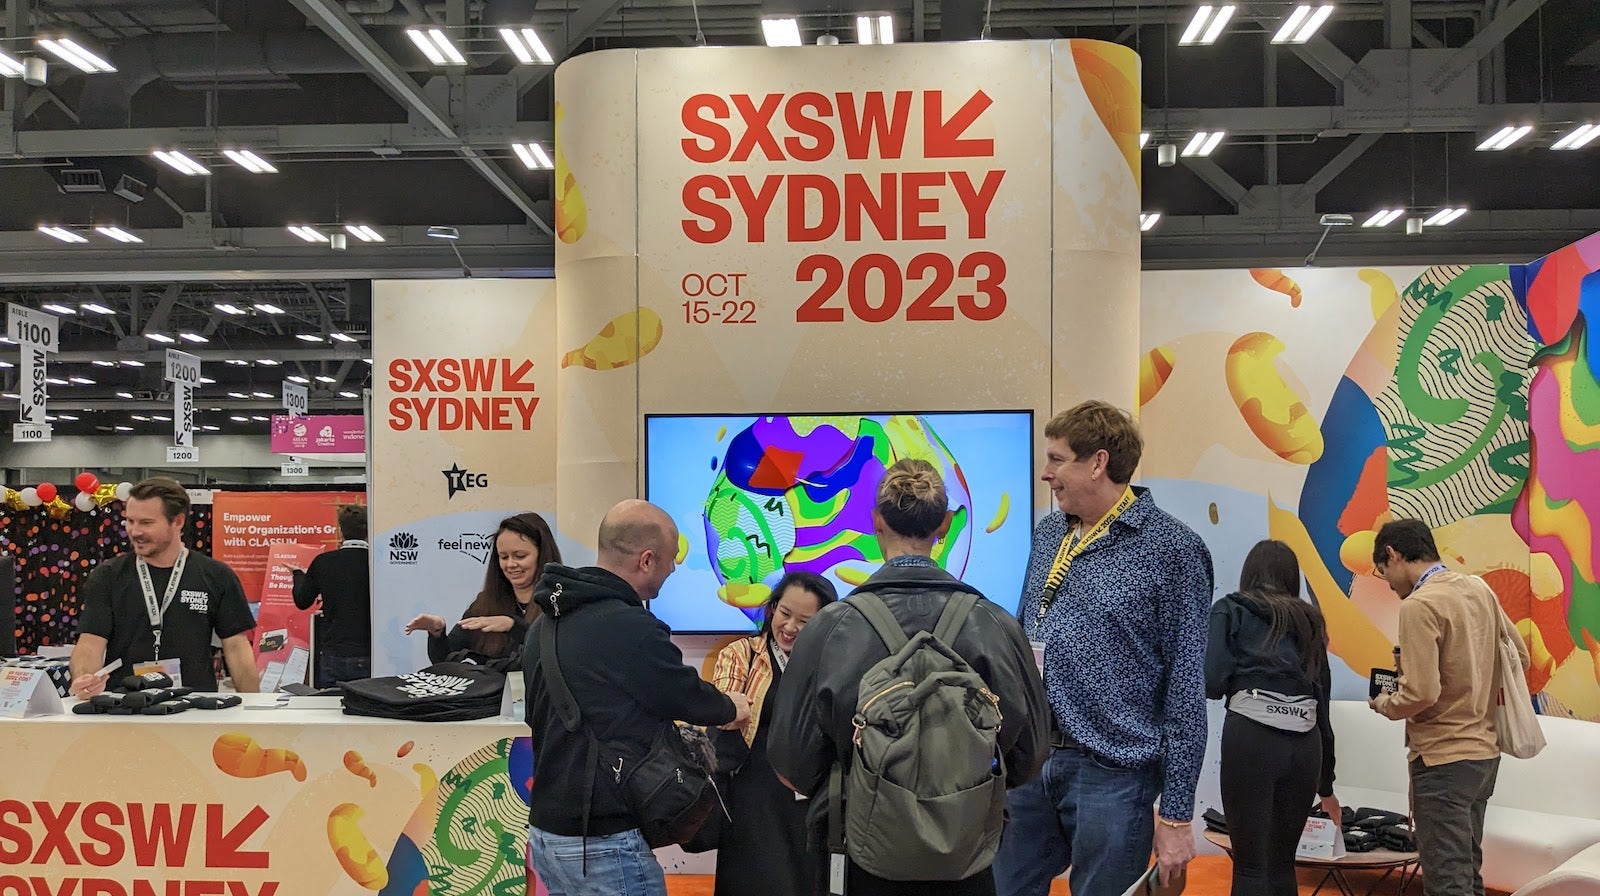 A photo of the SXSW Sydney 2023 stand from SXSW in Austin, 2023